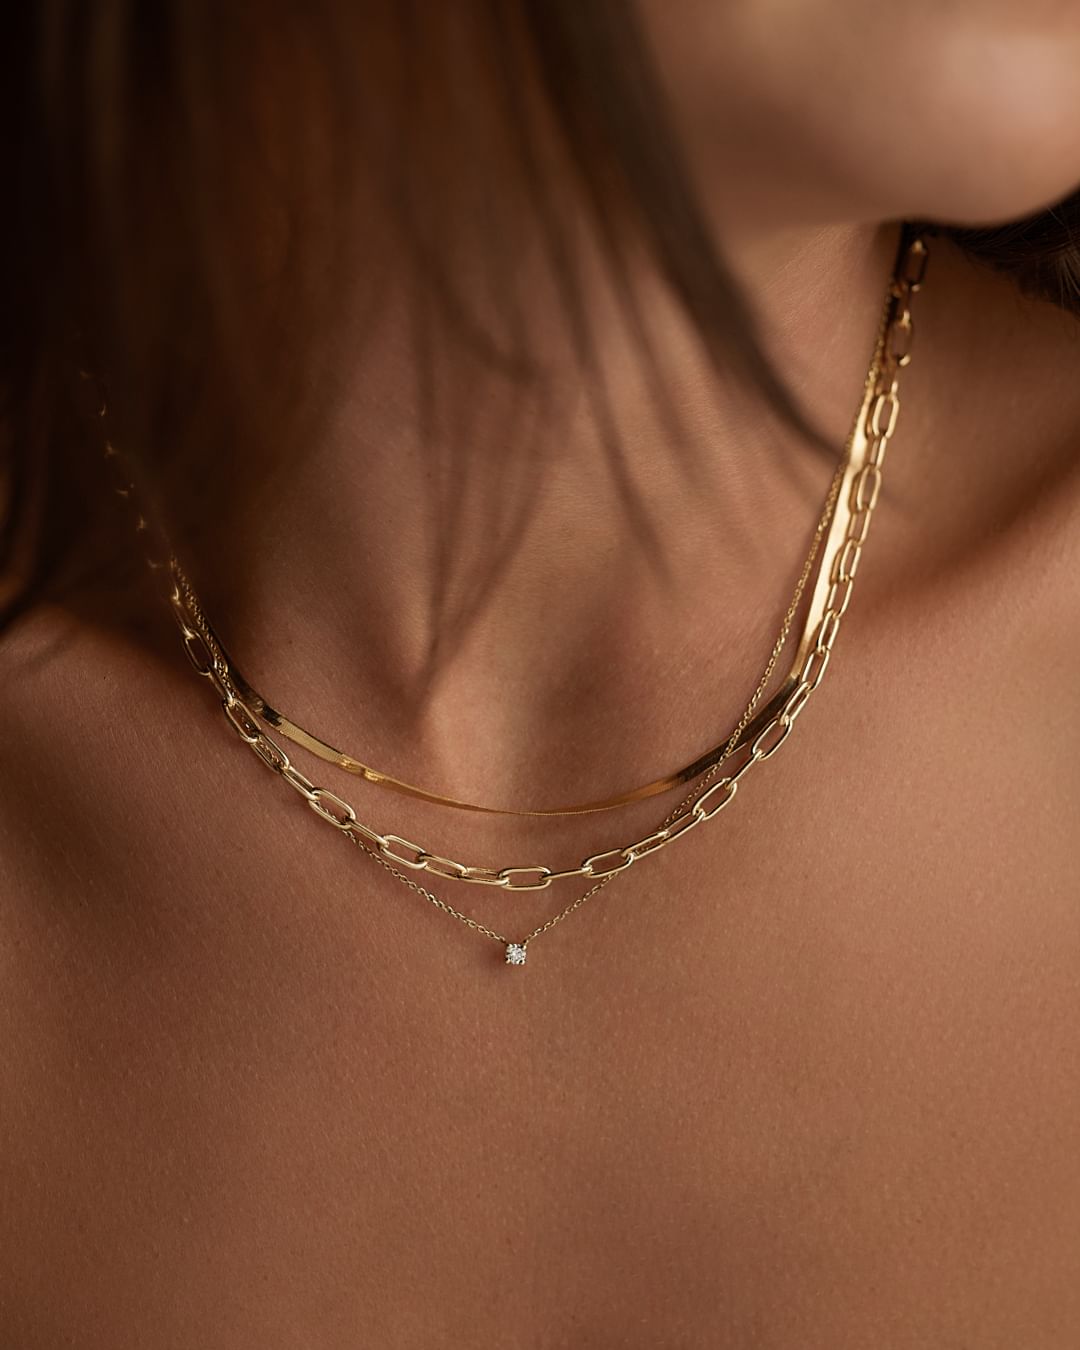 close up image of a model wearing layered gold necklaces